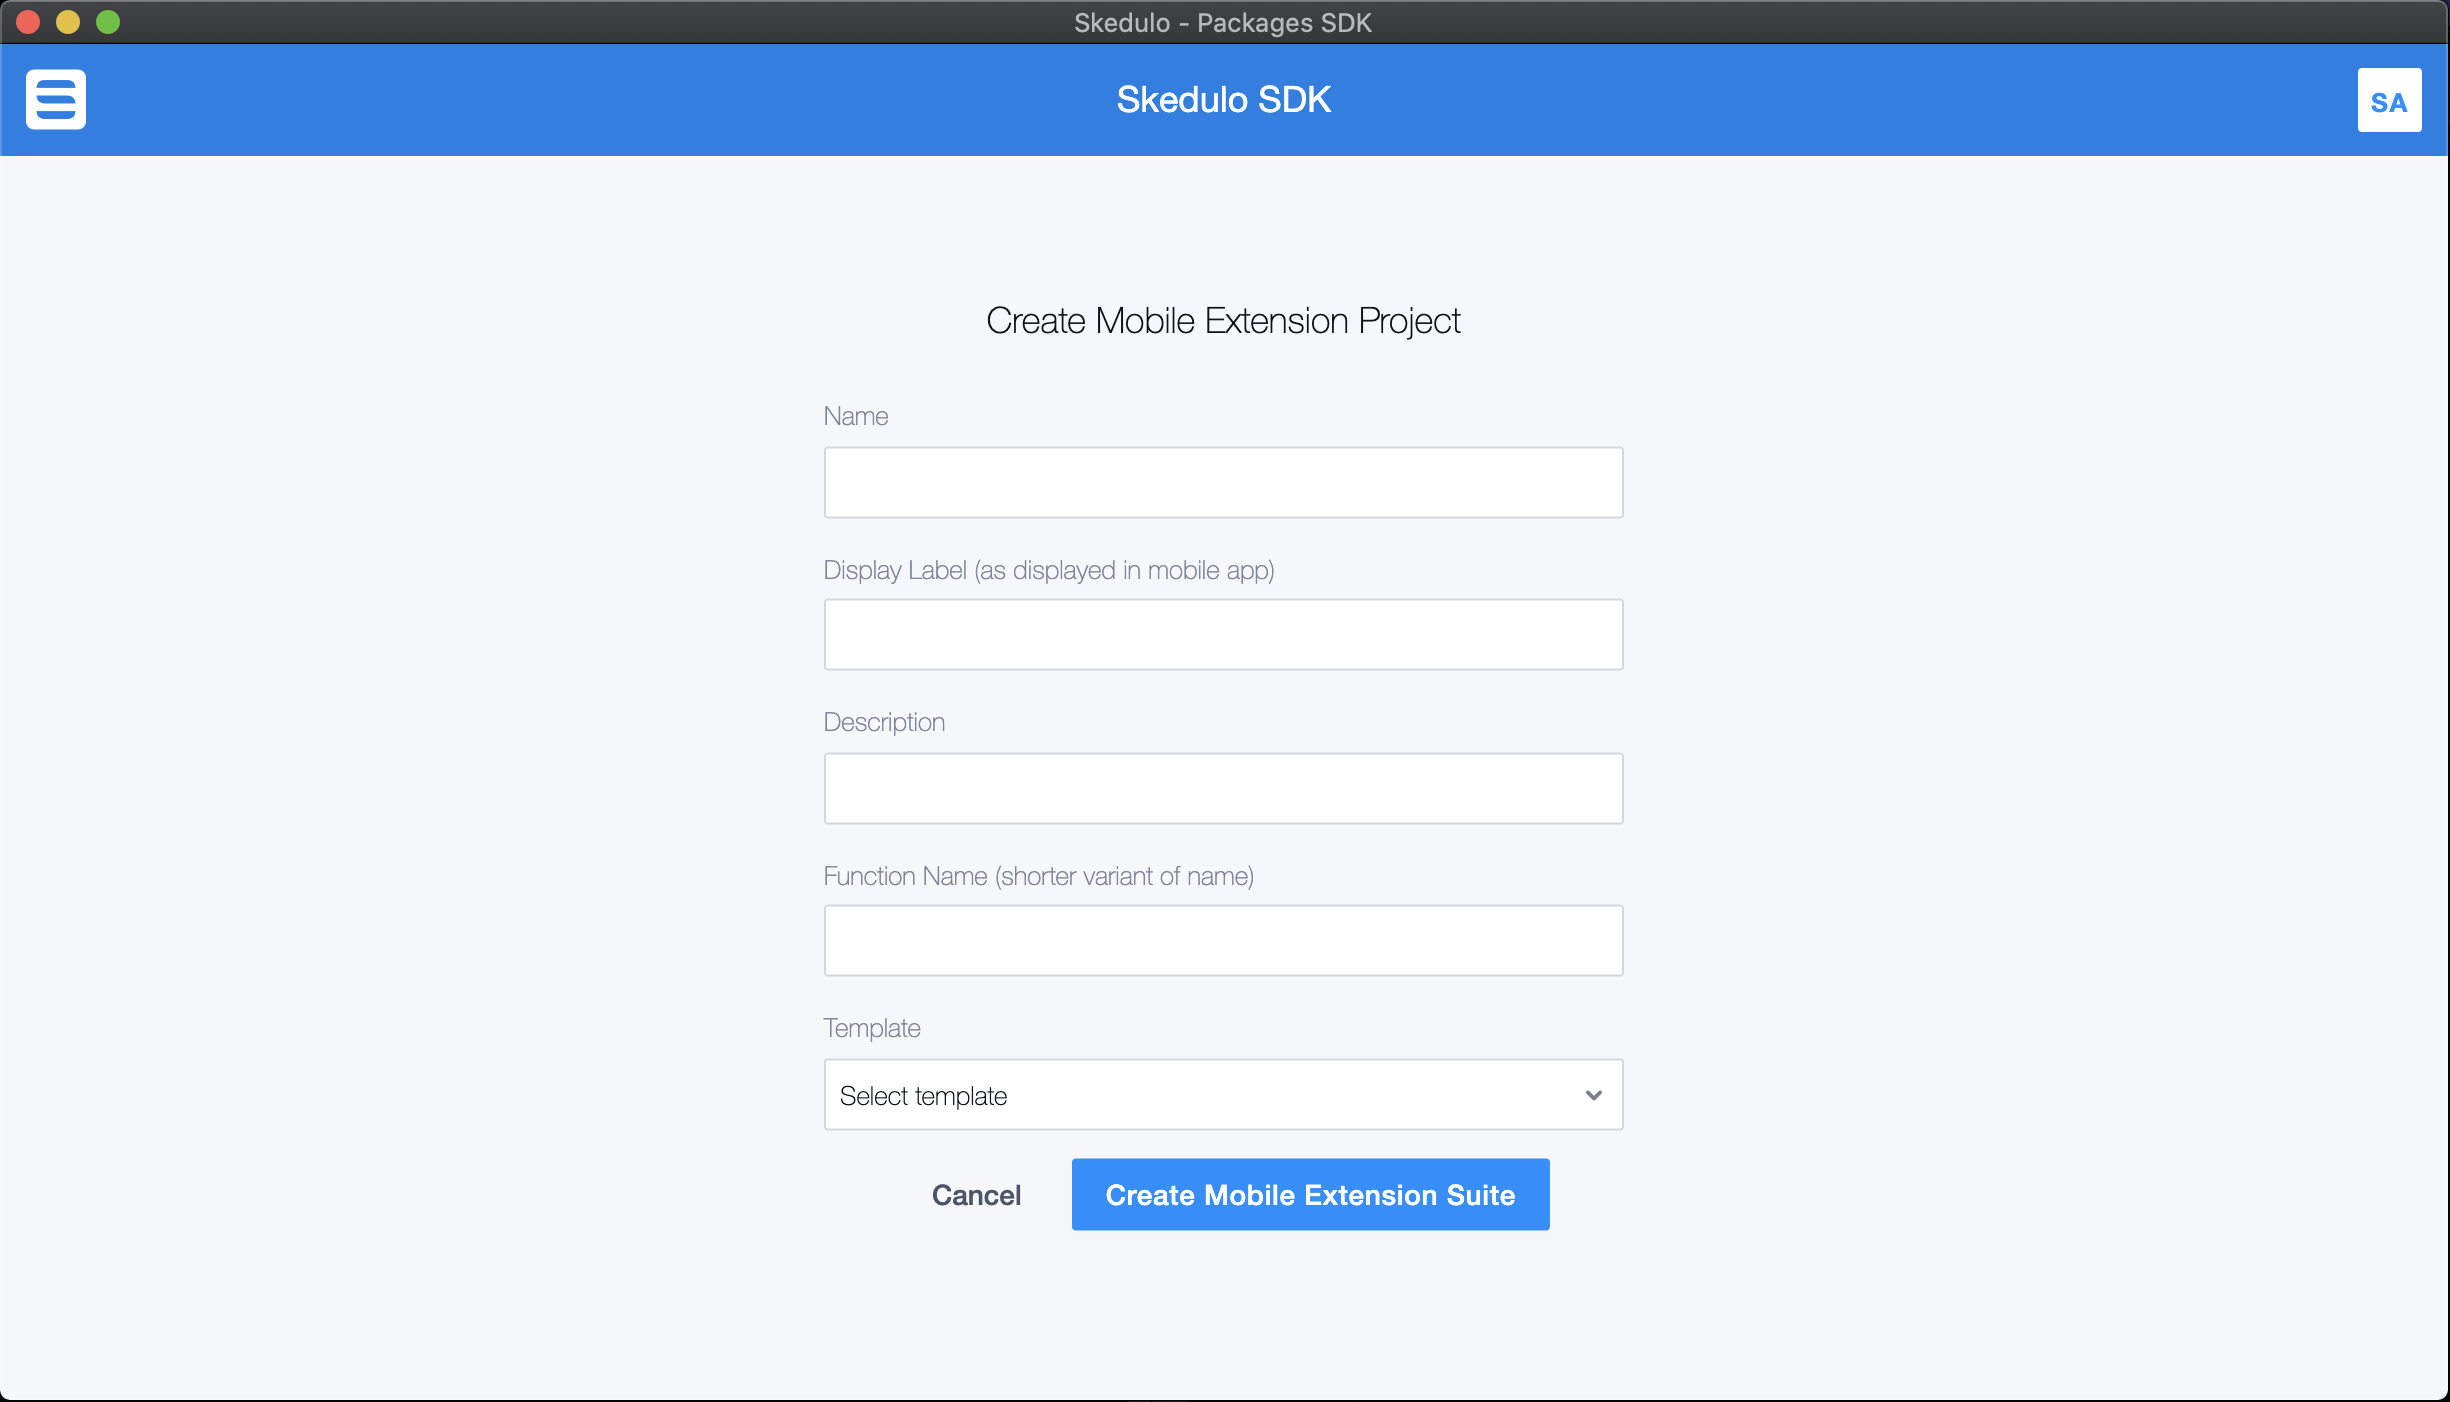 Create Mobile Extension Suite Project